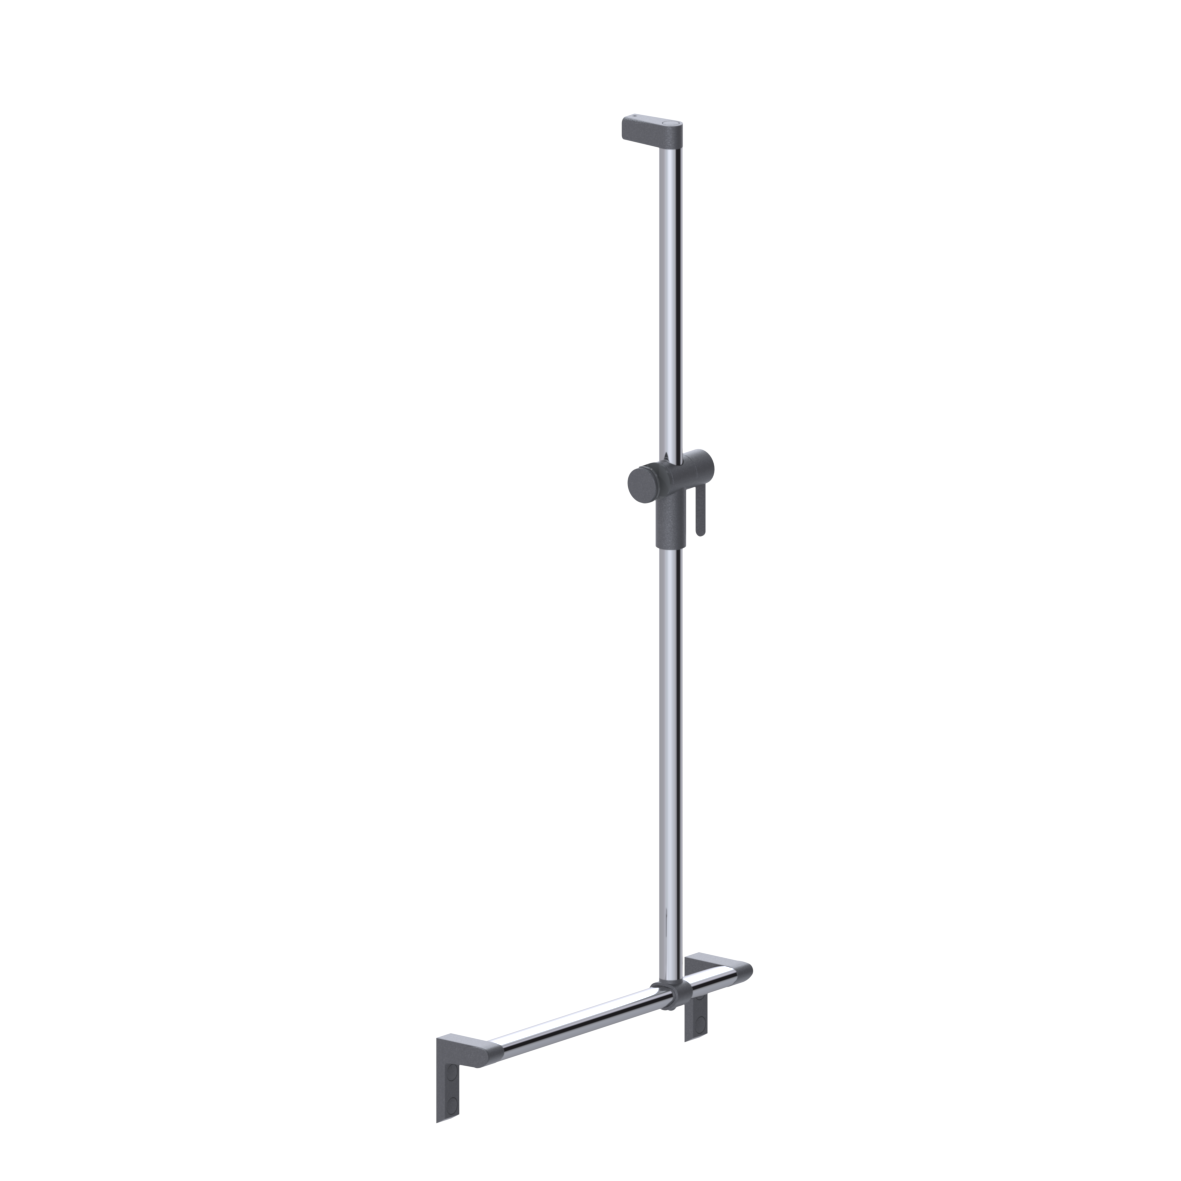 Cavere Care Chrome Shower handrail, with movable shower handrail, left and right, 500 x 1100 mm, Chrome metallic anthracite